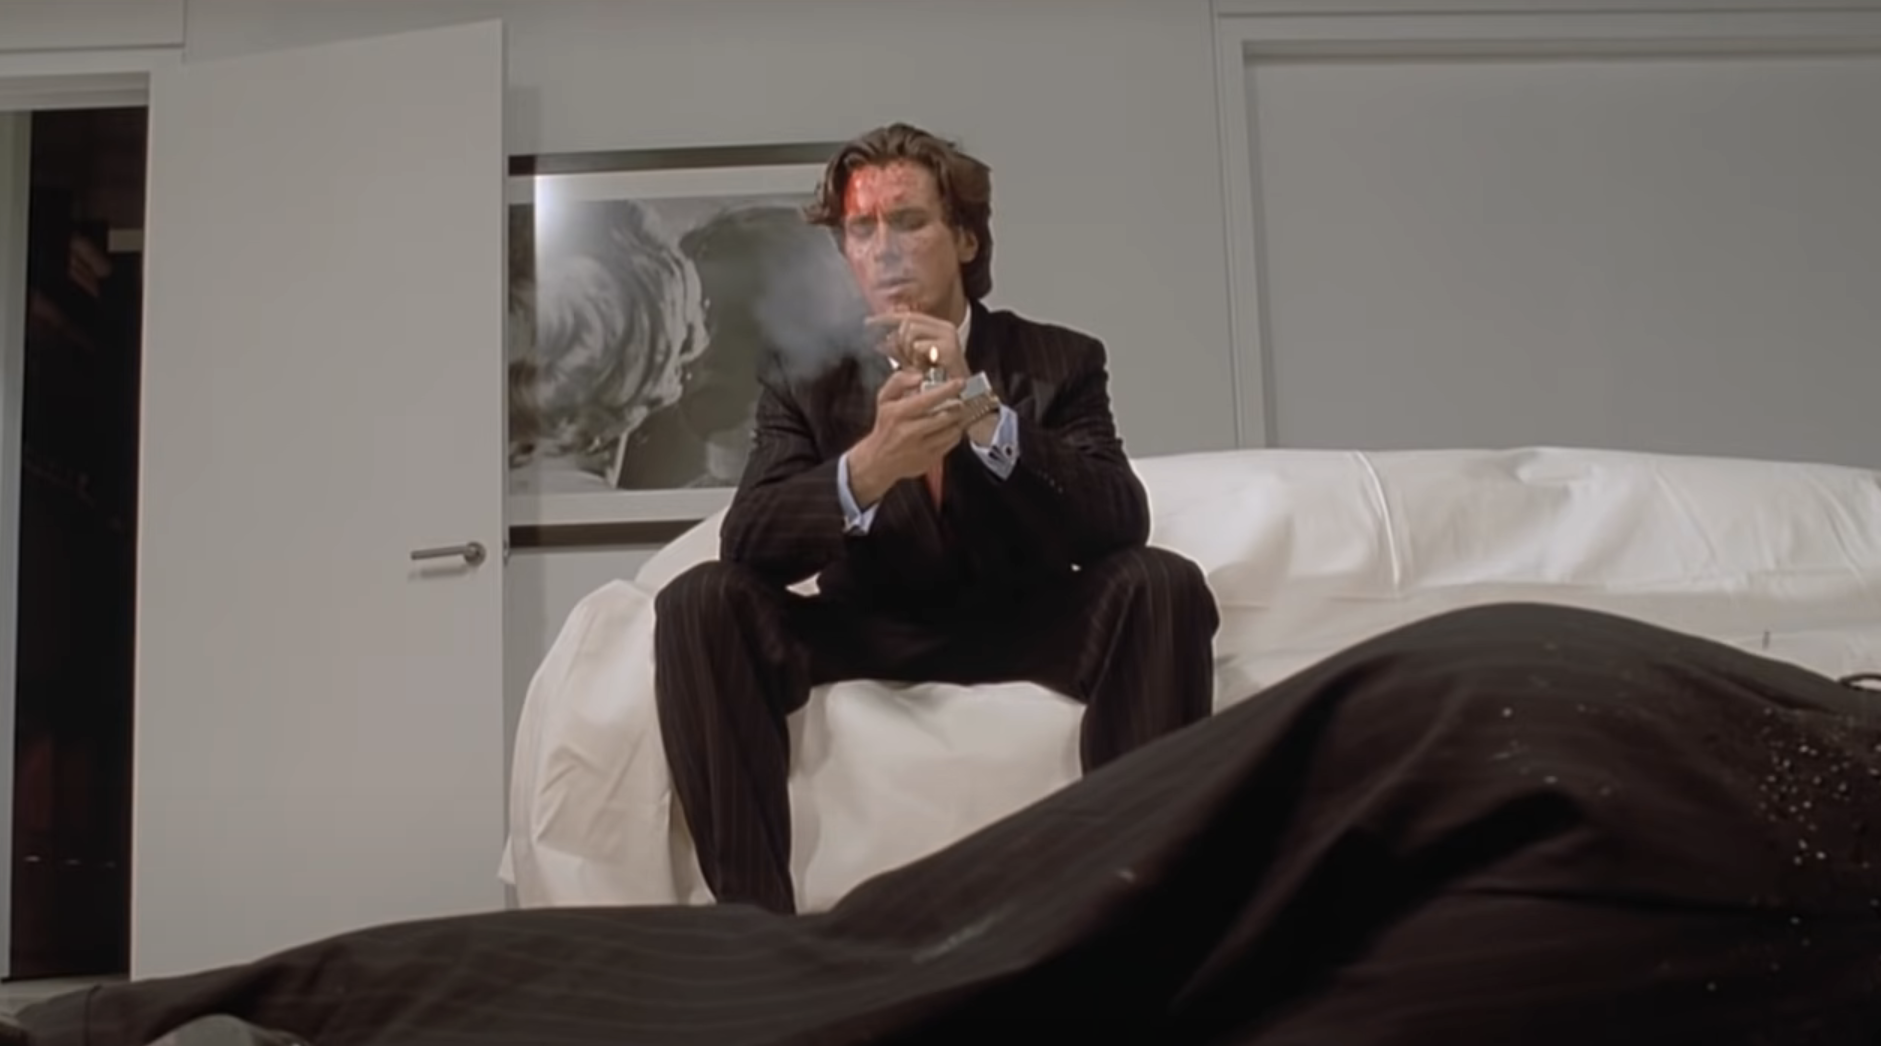 Patrick Bateman, played by Christian Bale, sitting on a couch and smoking a cigar